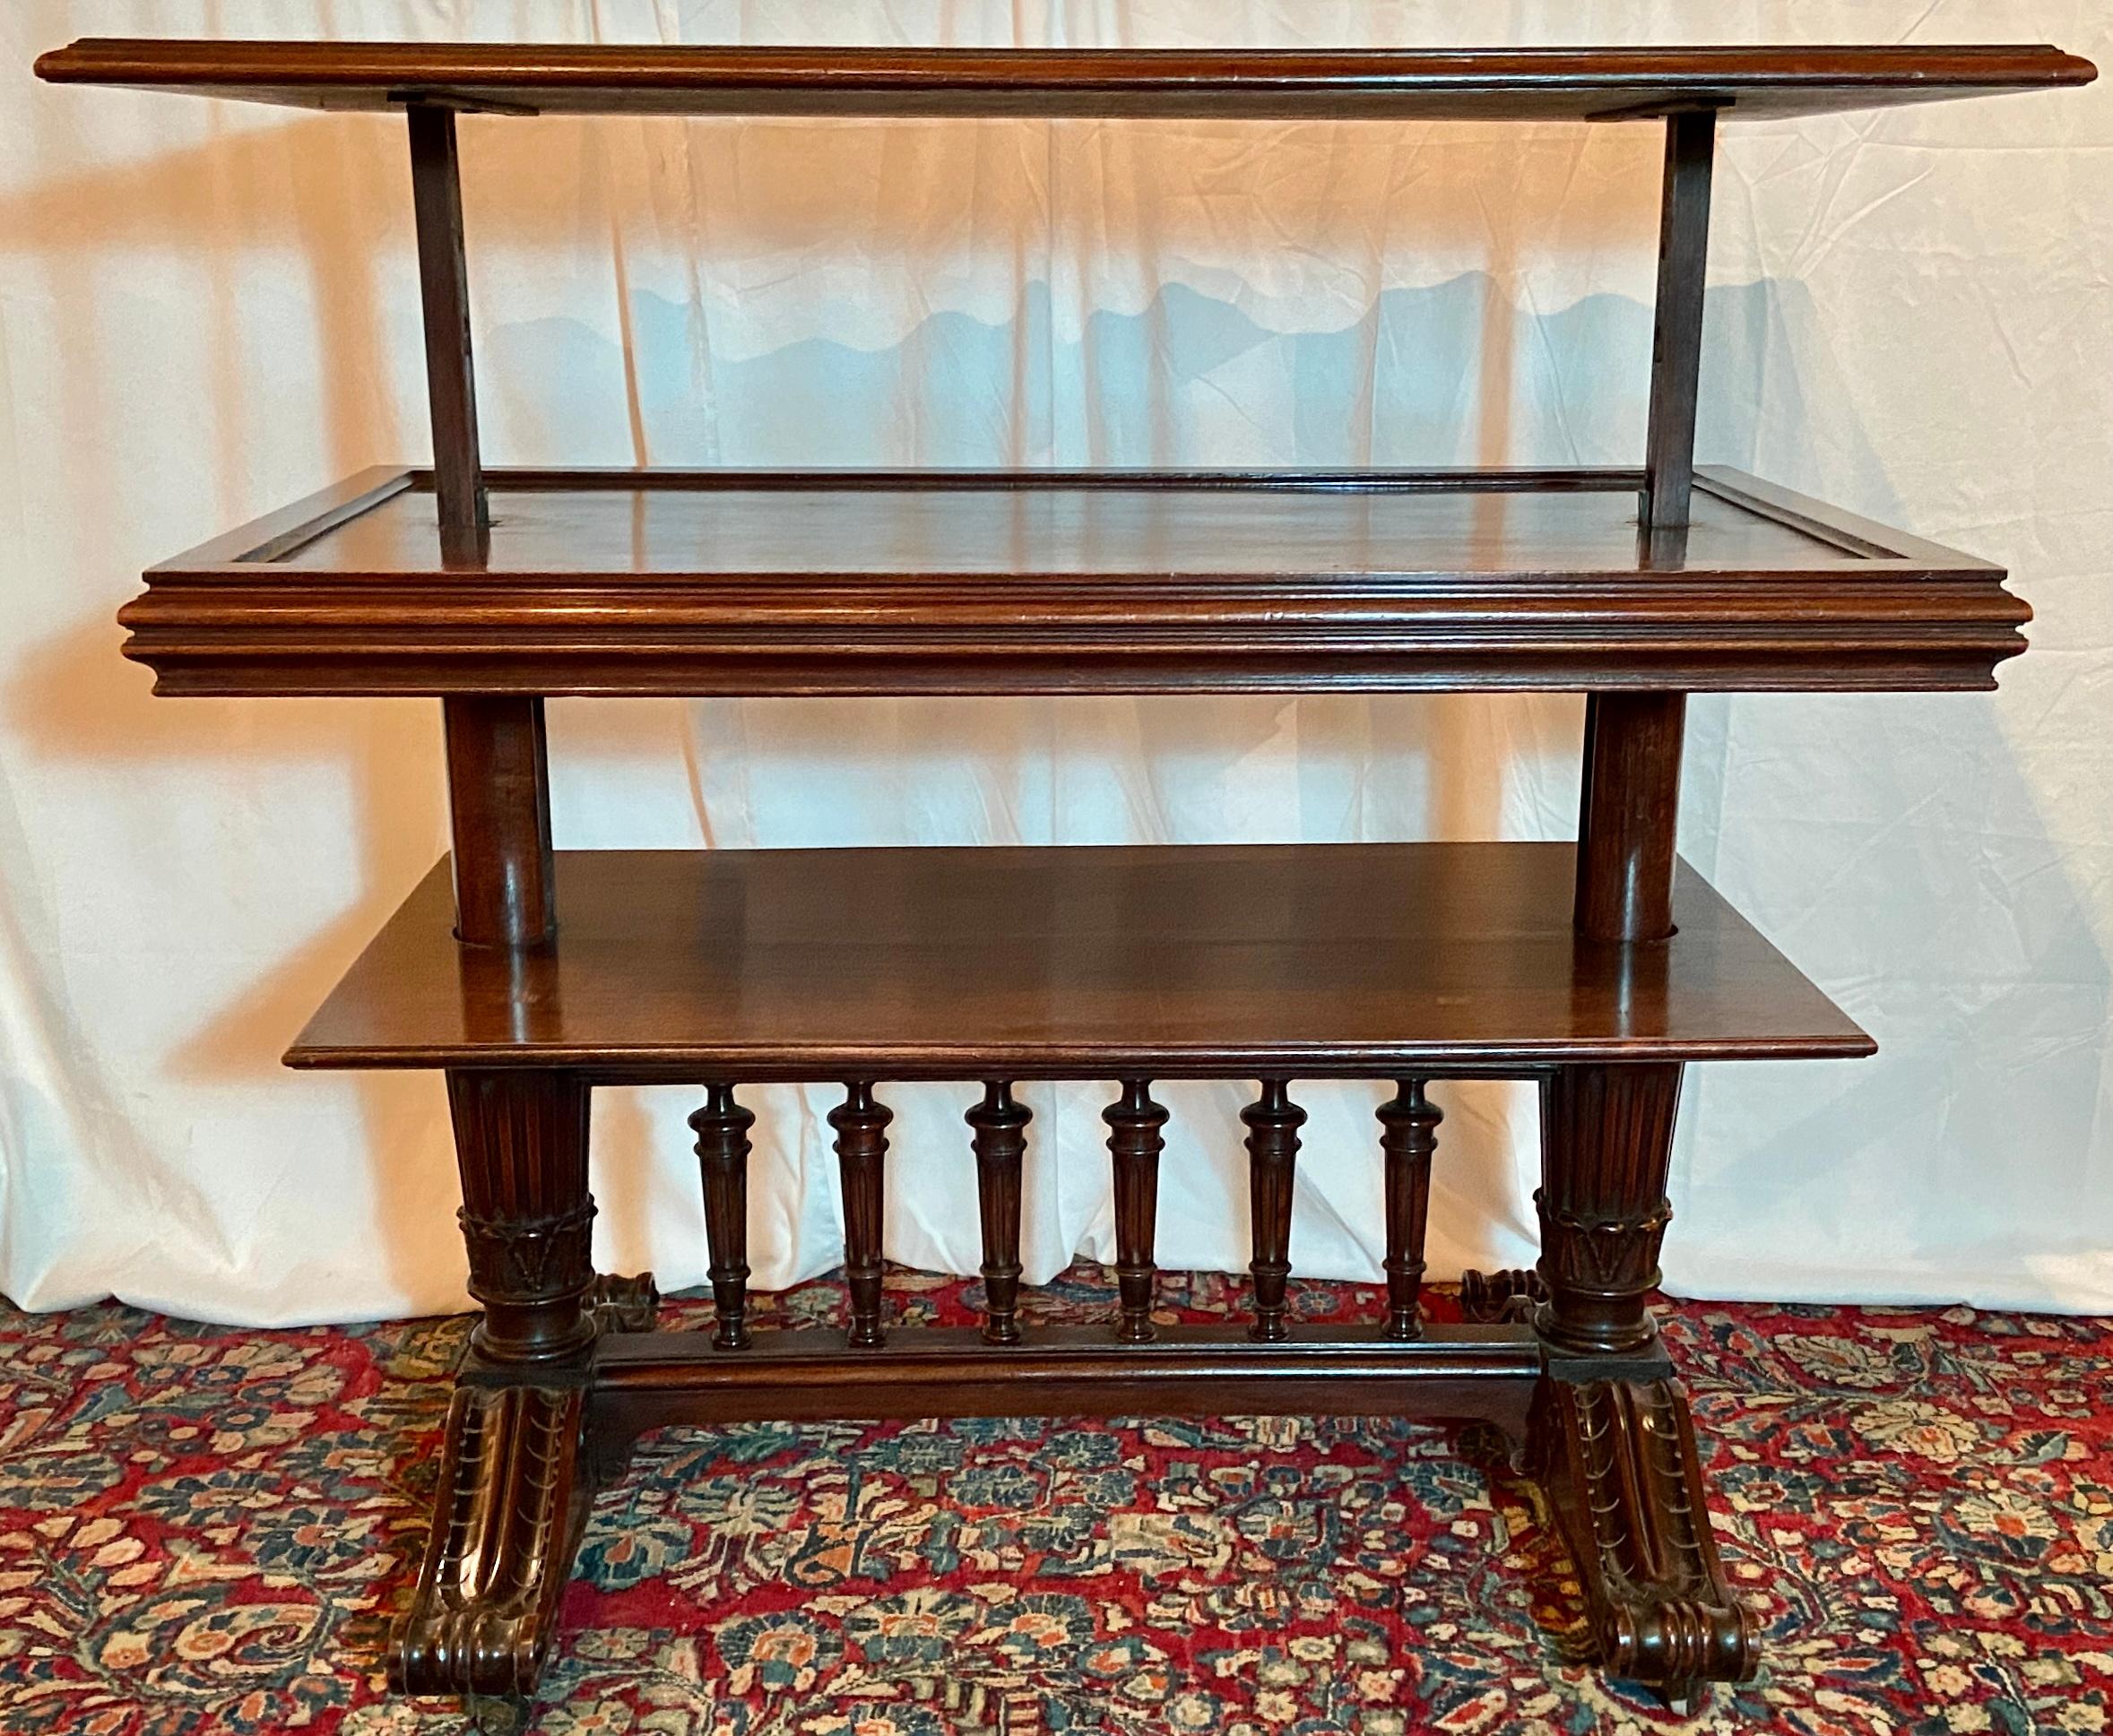 Antique 19th Century English Mahogany Two-Tier Mechanical Table.
Measurements: 
41.5 inches in height (up)
31.25 inches in height (down) 
43.25 inches in width 
25.5 inches in depth.

 